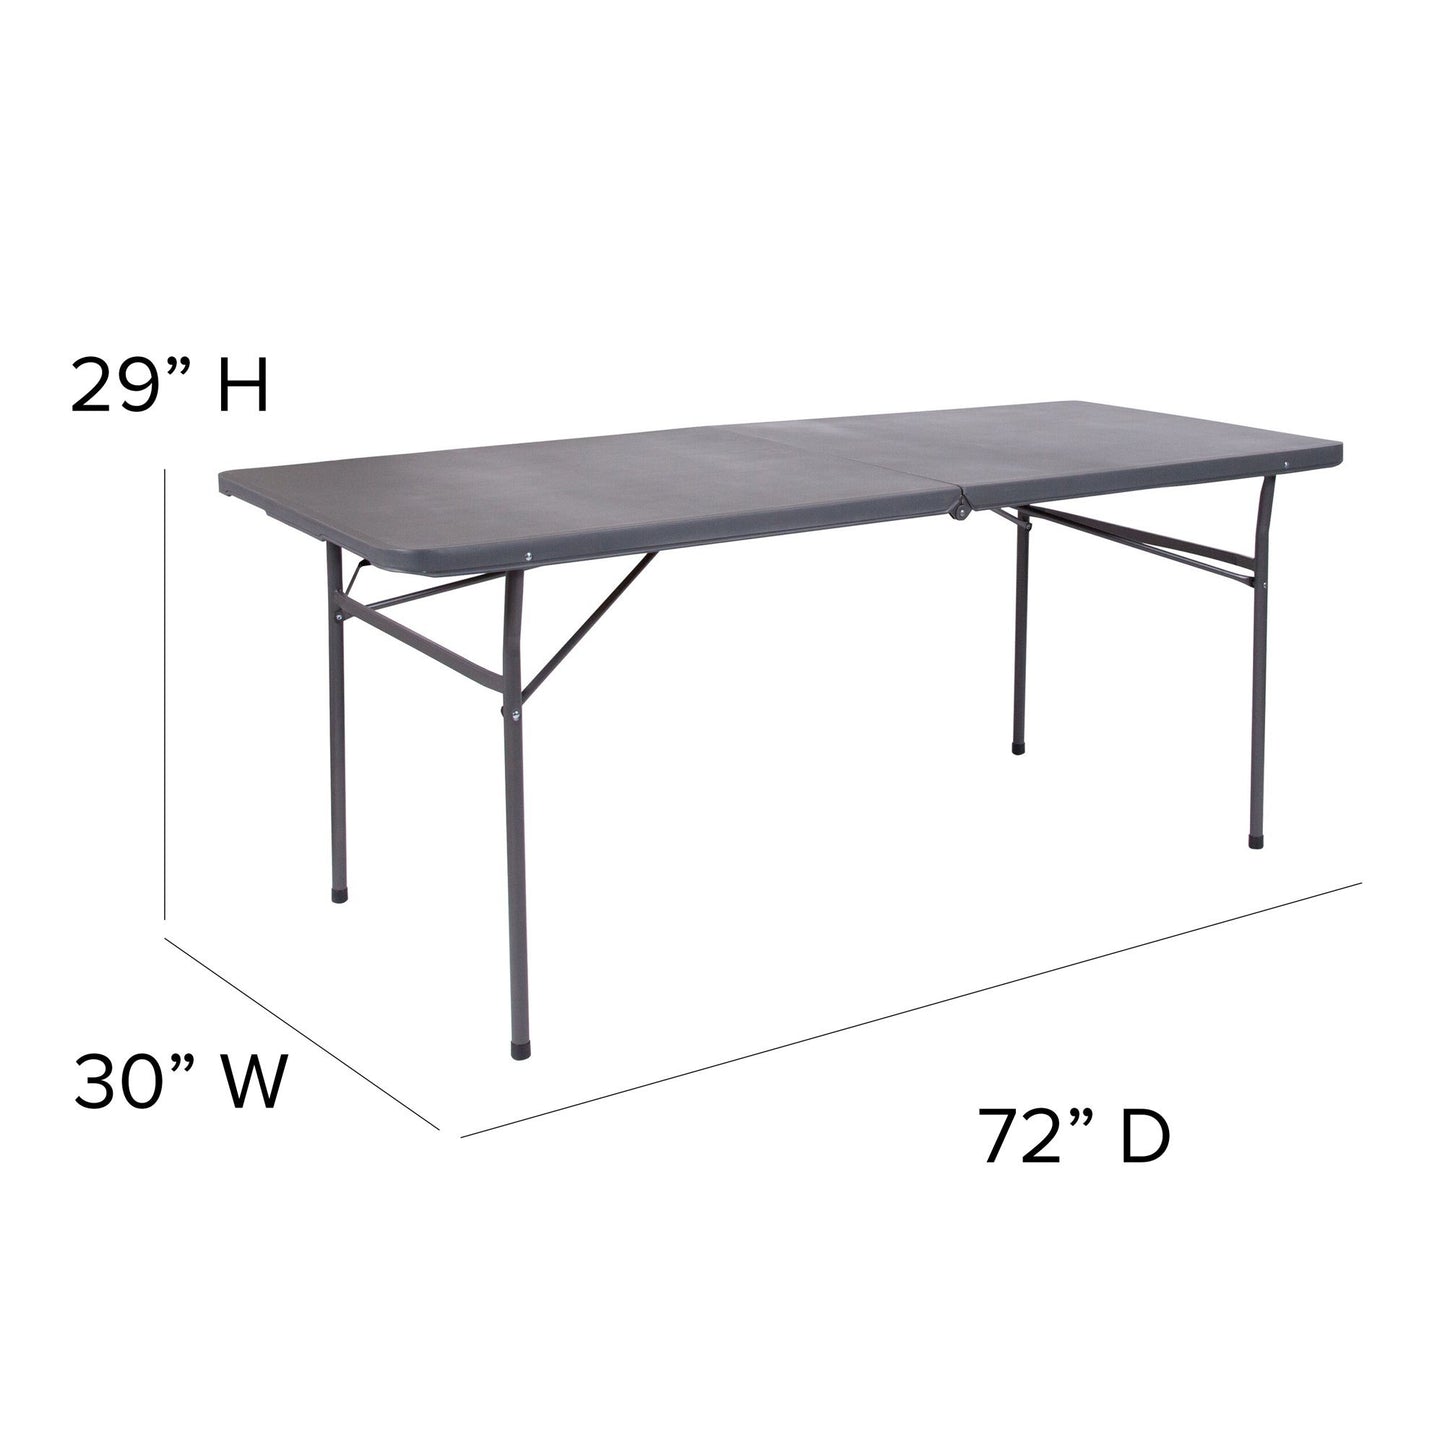 6-Foot Bi-Fold Granite White Plastic Banquet and Event Folding Table with Carrying Handle